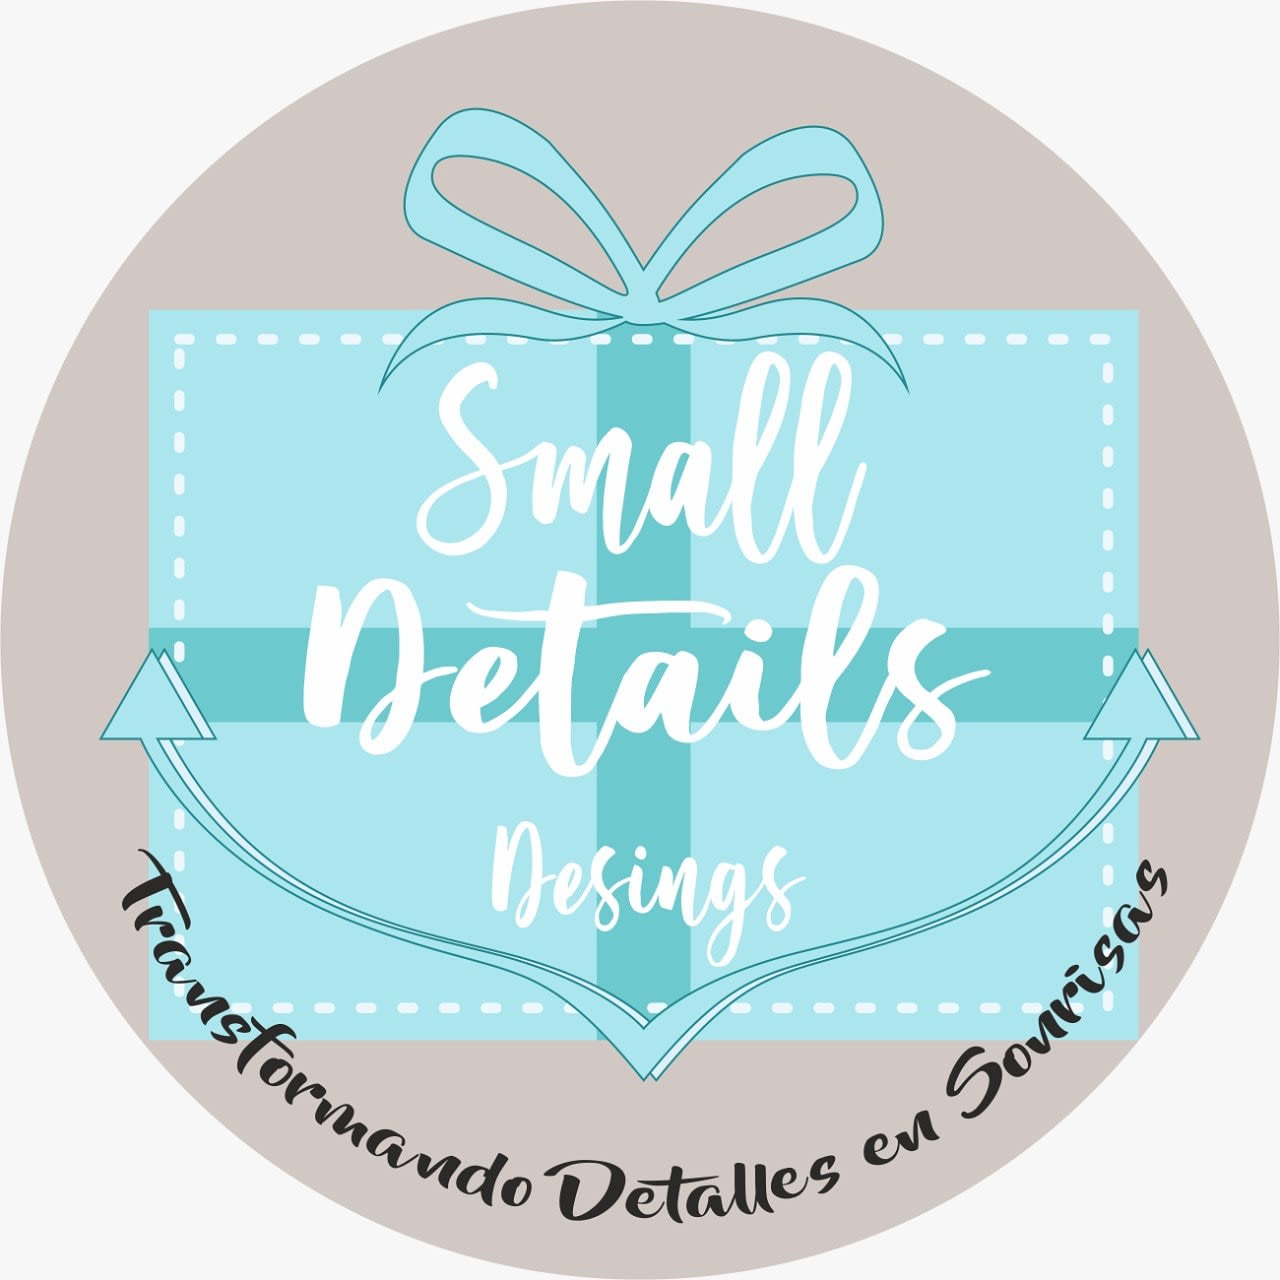 Small Details Designs